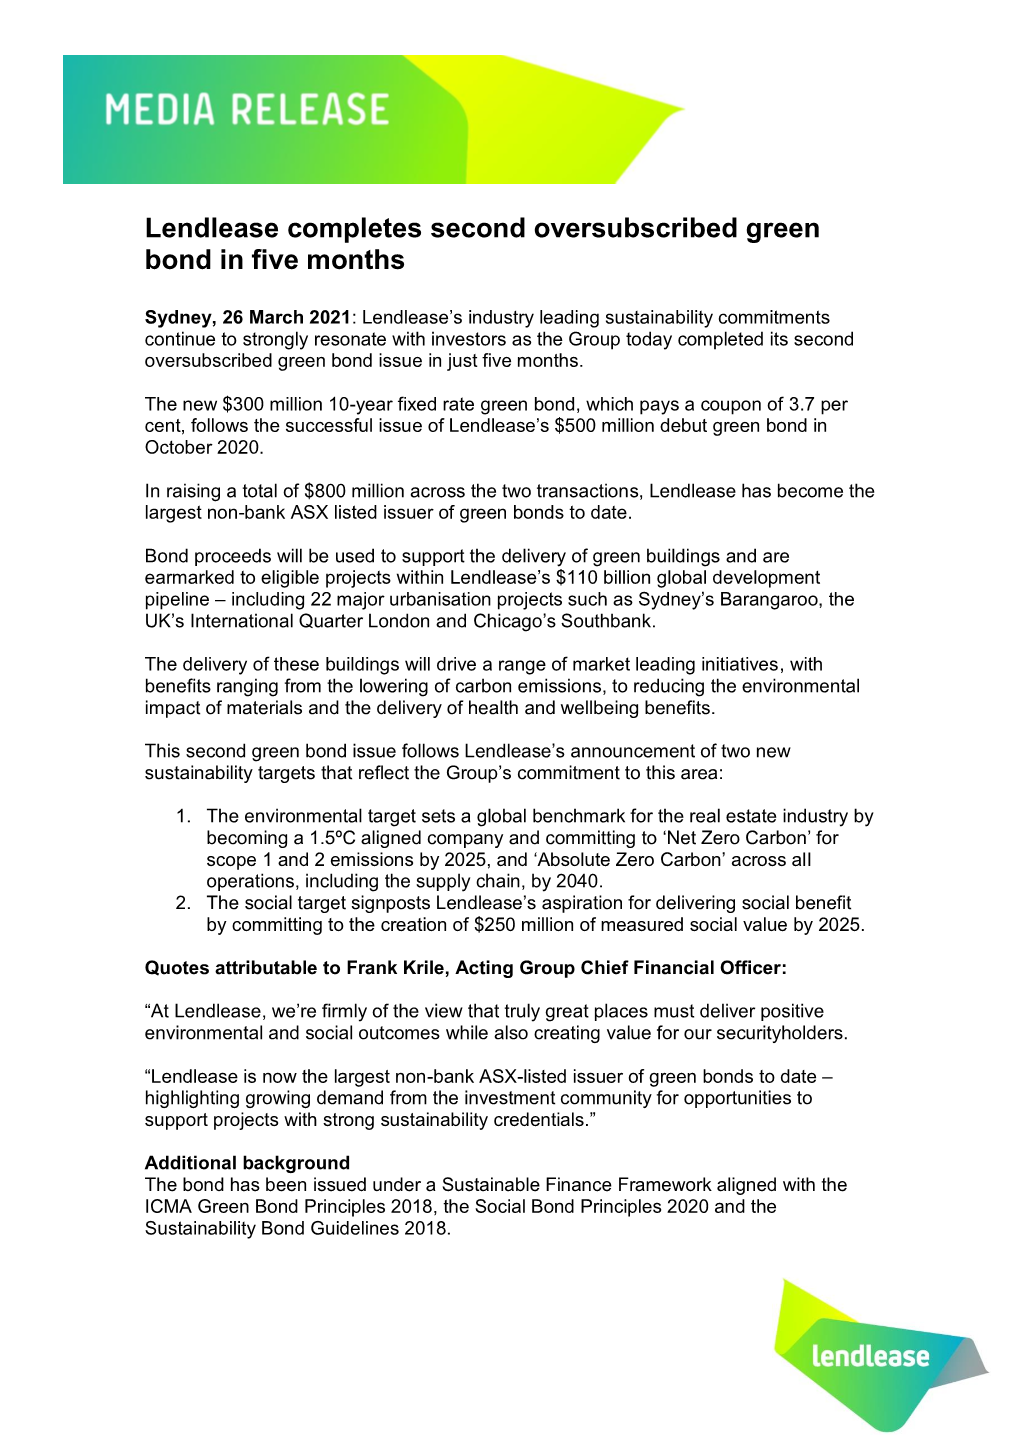 Lendlease Completes Second Oversubscribed Green Bond in Five Months